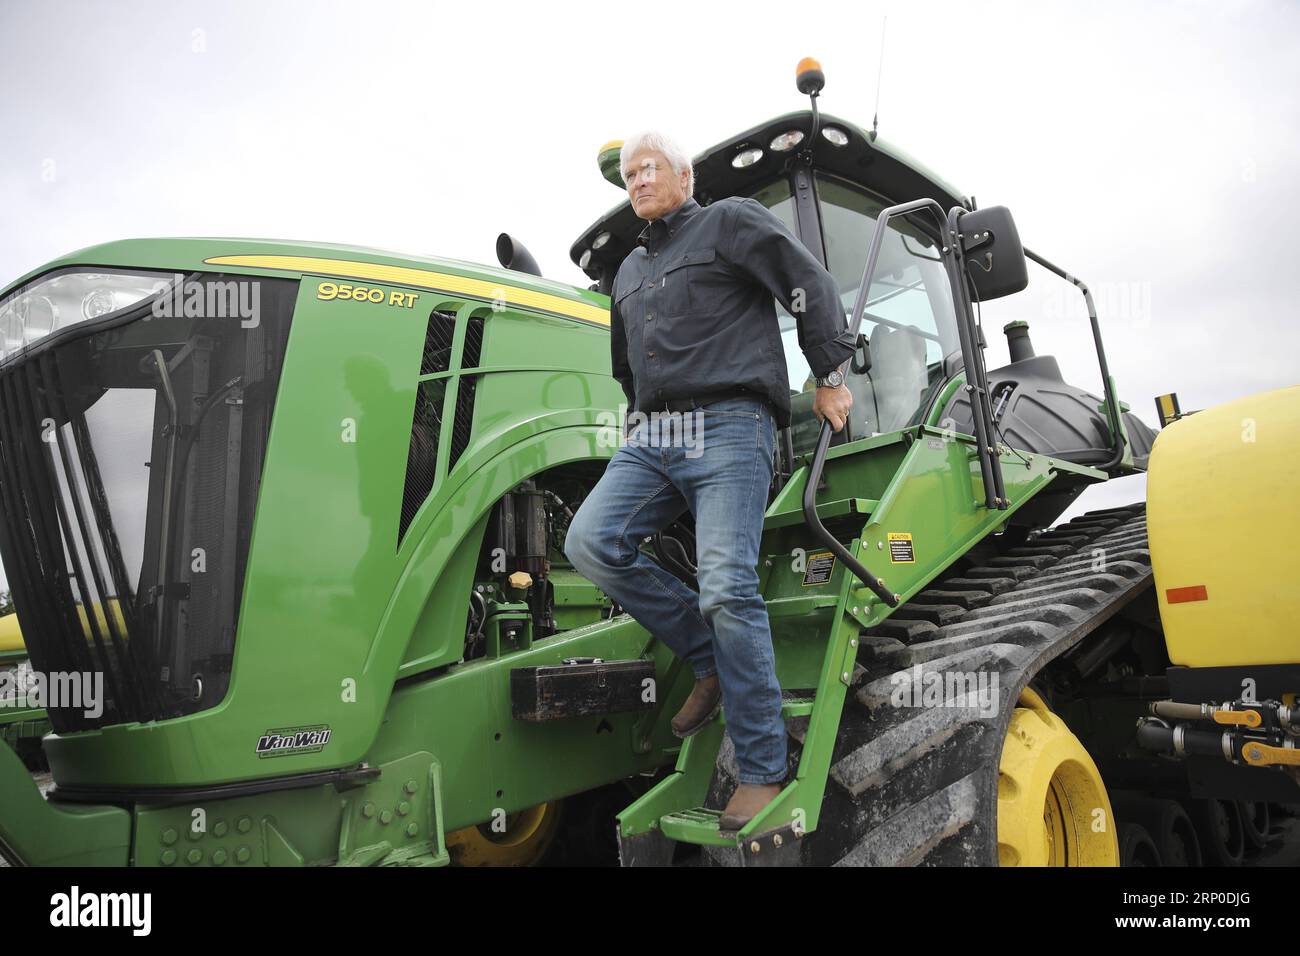 (180509) -- IOWA, May 9, 2018 -- Rick Kimberley walks down a farming combine machine at his farm near Des Moines, capital of Iowa State, May 3, 2018. Rick and his son, Grant, grow more than 4,000 acres of corn and soybeans with a couple of hired hands and massive combines whose computers precisely track yield, moisture and other key statistics for each row and acre. He has been to China 15 times in recent years to talk about precision farming and other tricks of his trade, becoming an ambassador for modern farming methods in China. As for the current trade tensions between the United States an Stock Photo